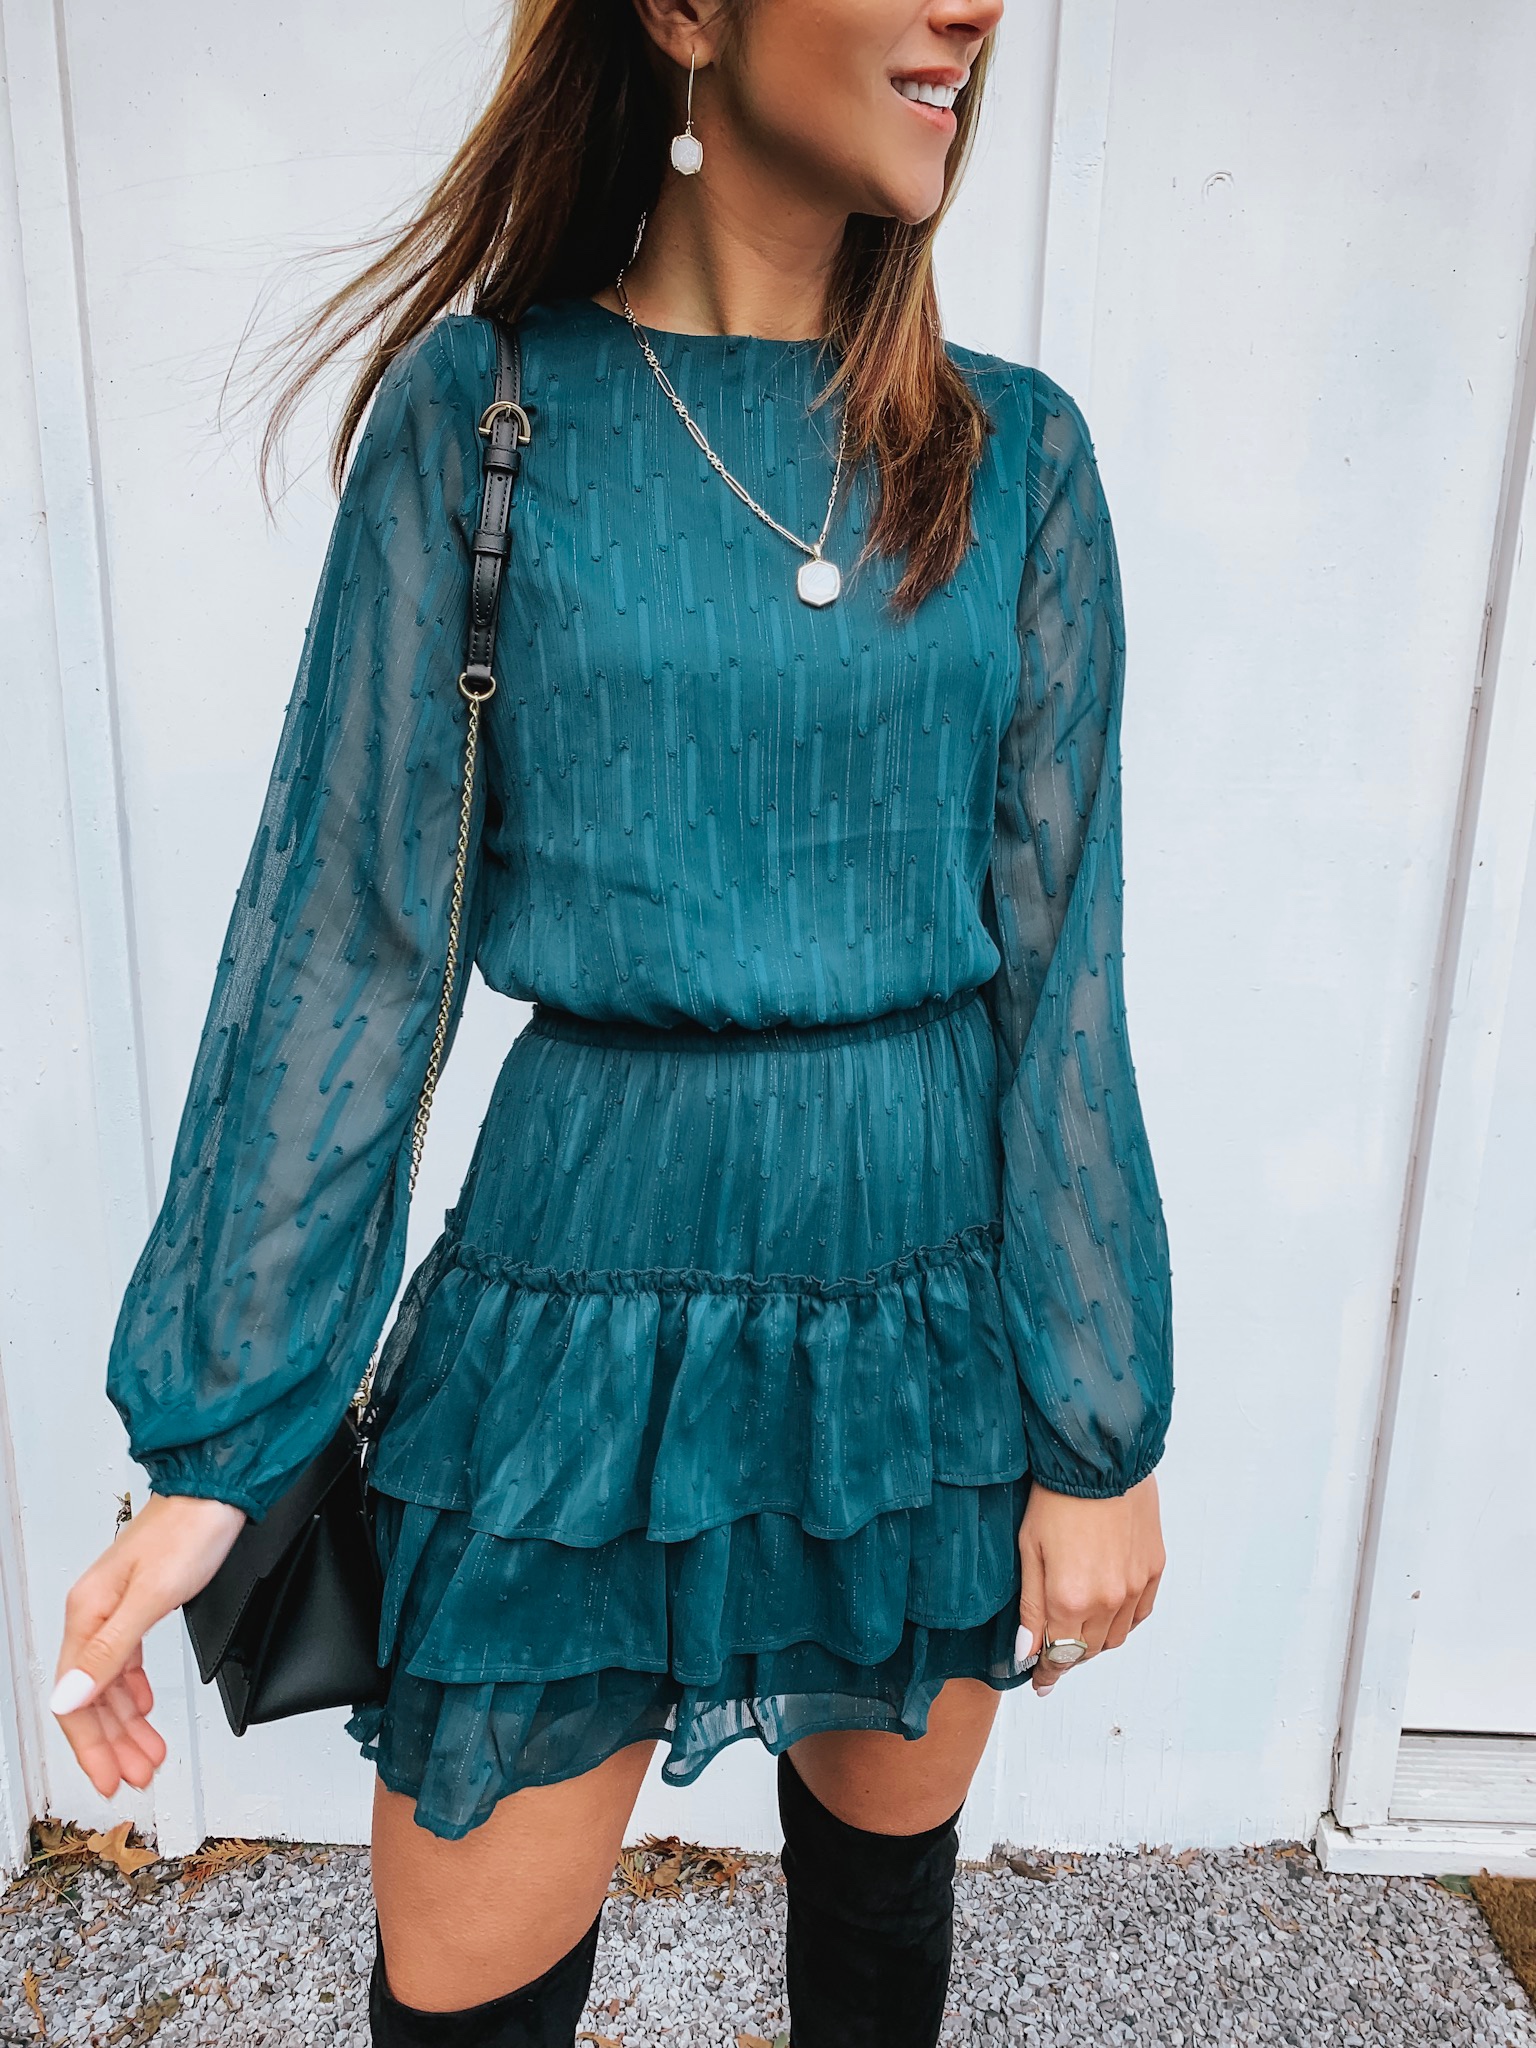 Green smocked dress, Over the knee boots